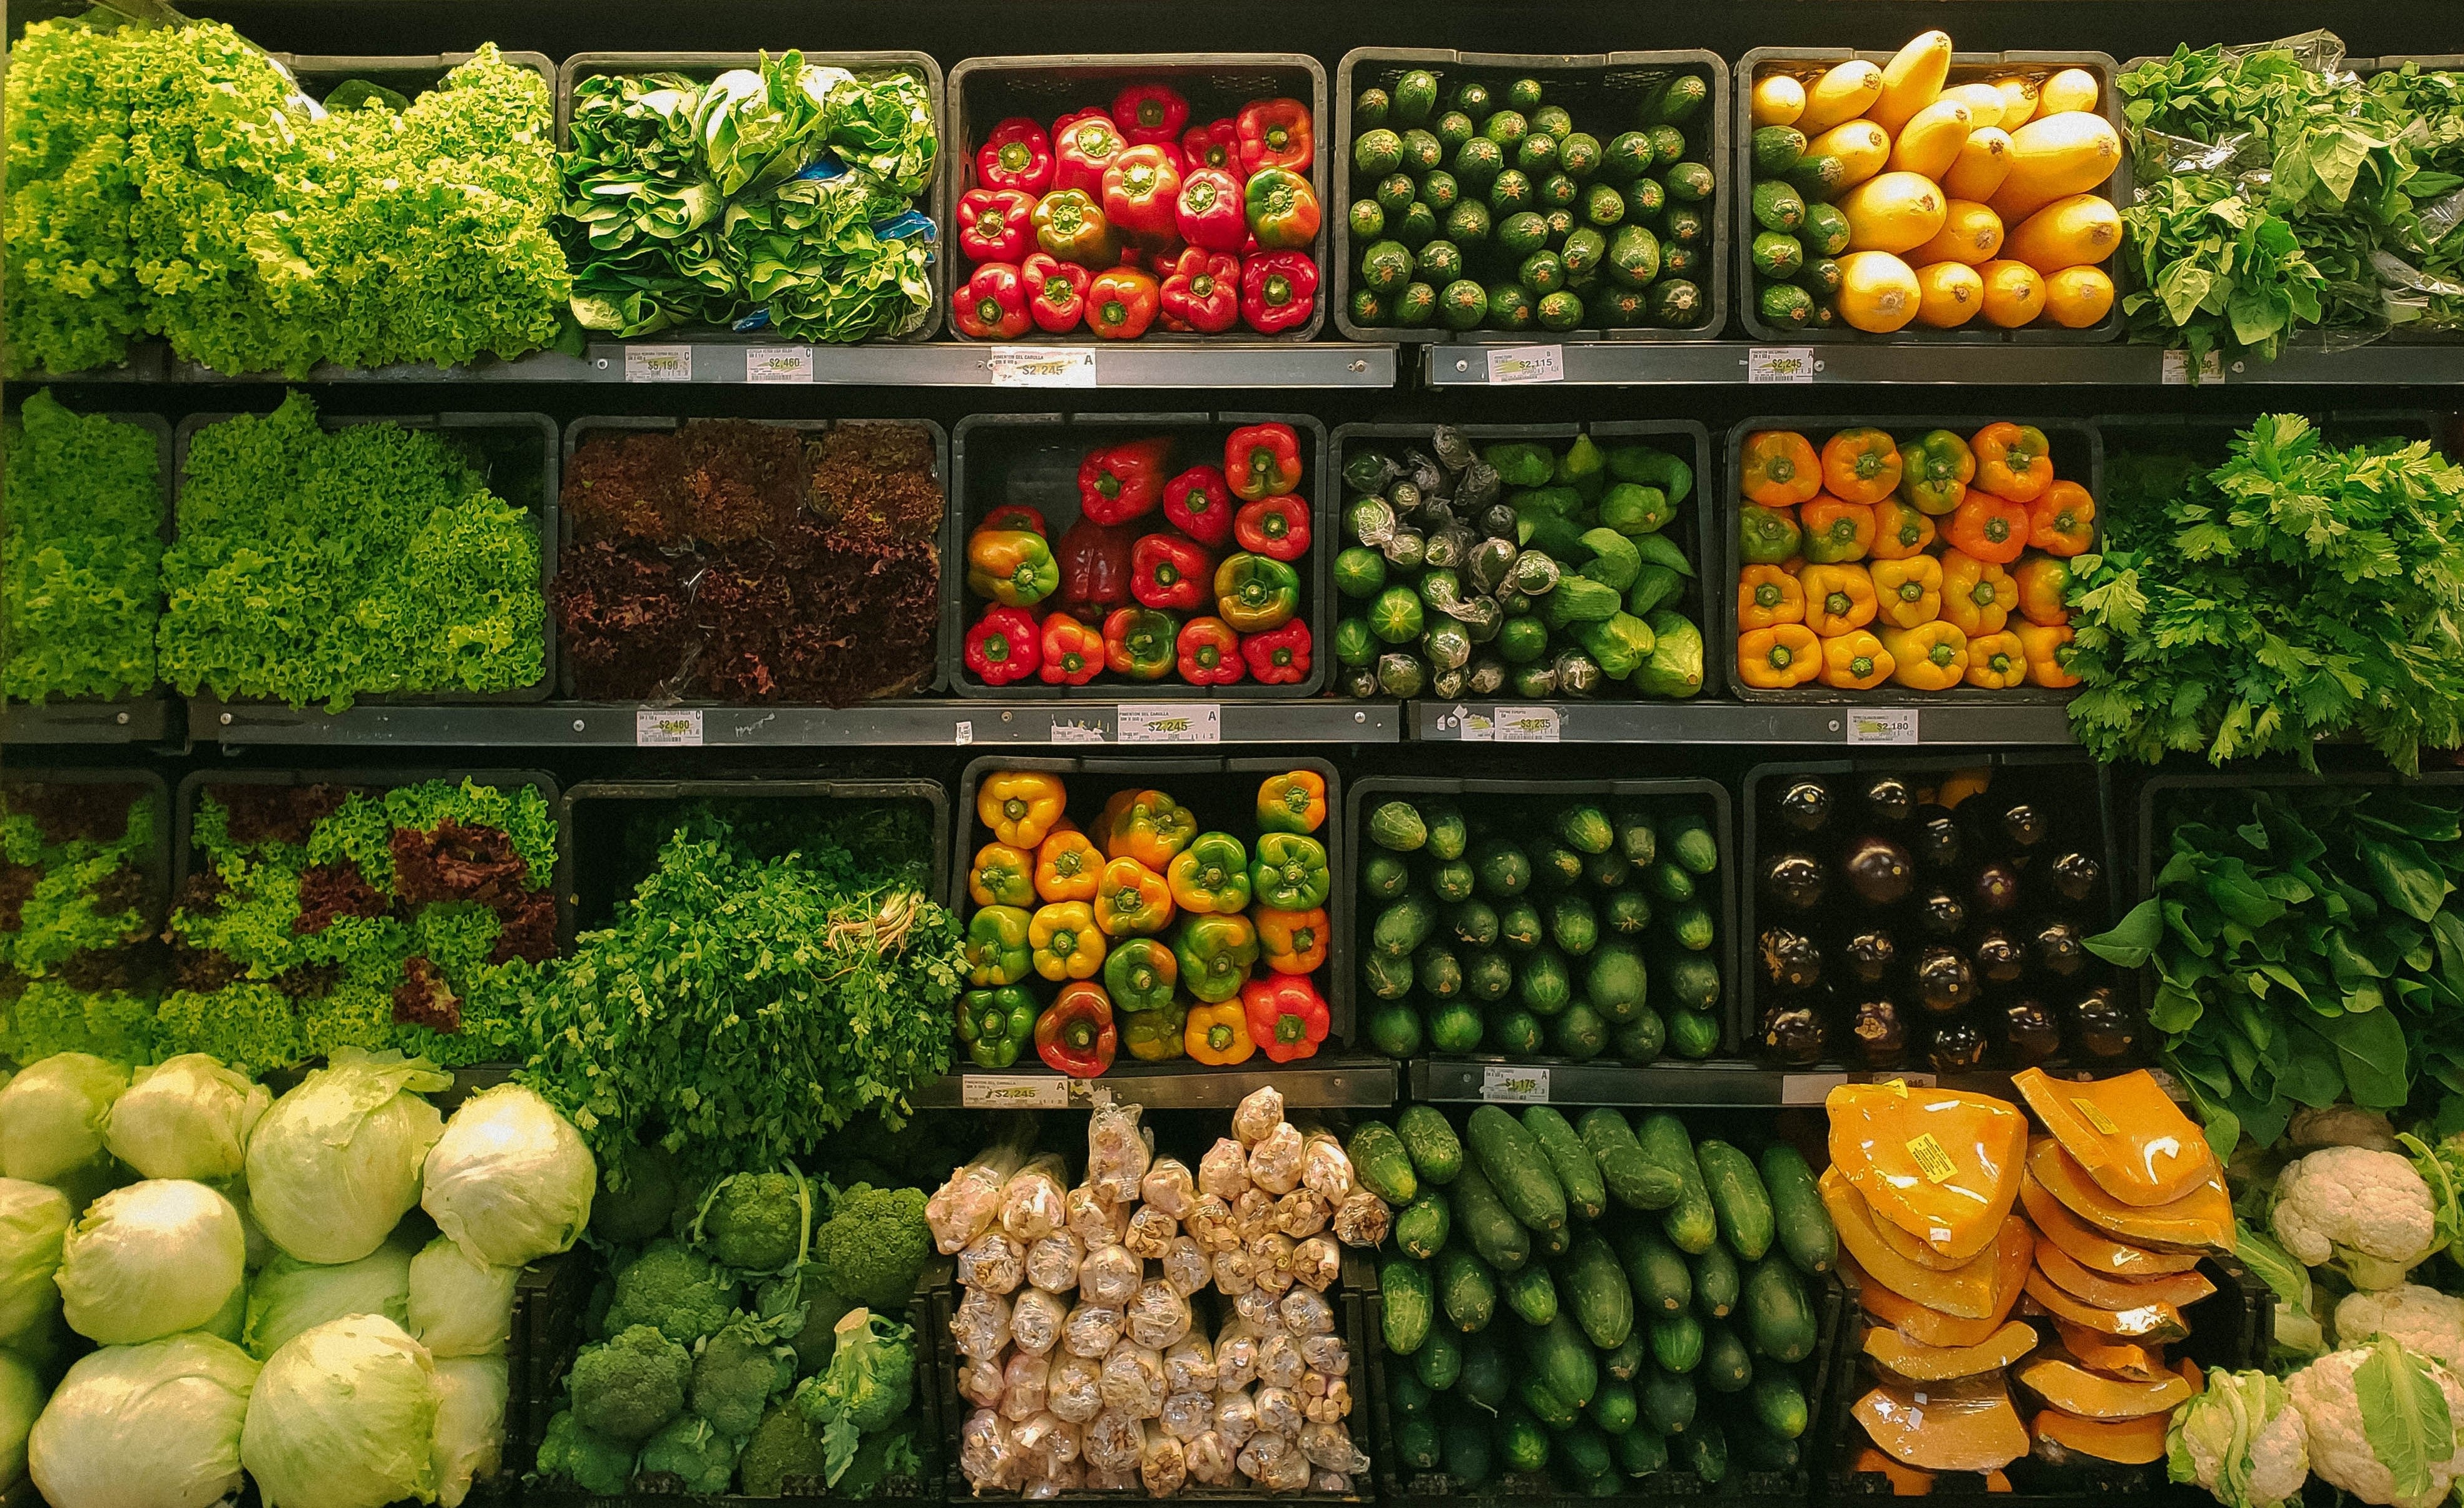 How To: Save Money at the Grocery Store and Still Shop Healthy